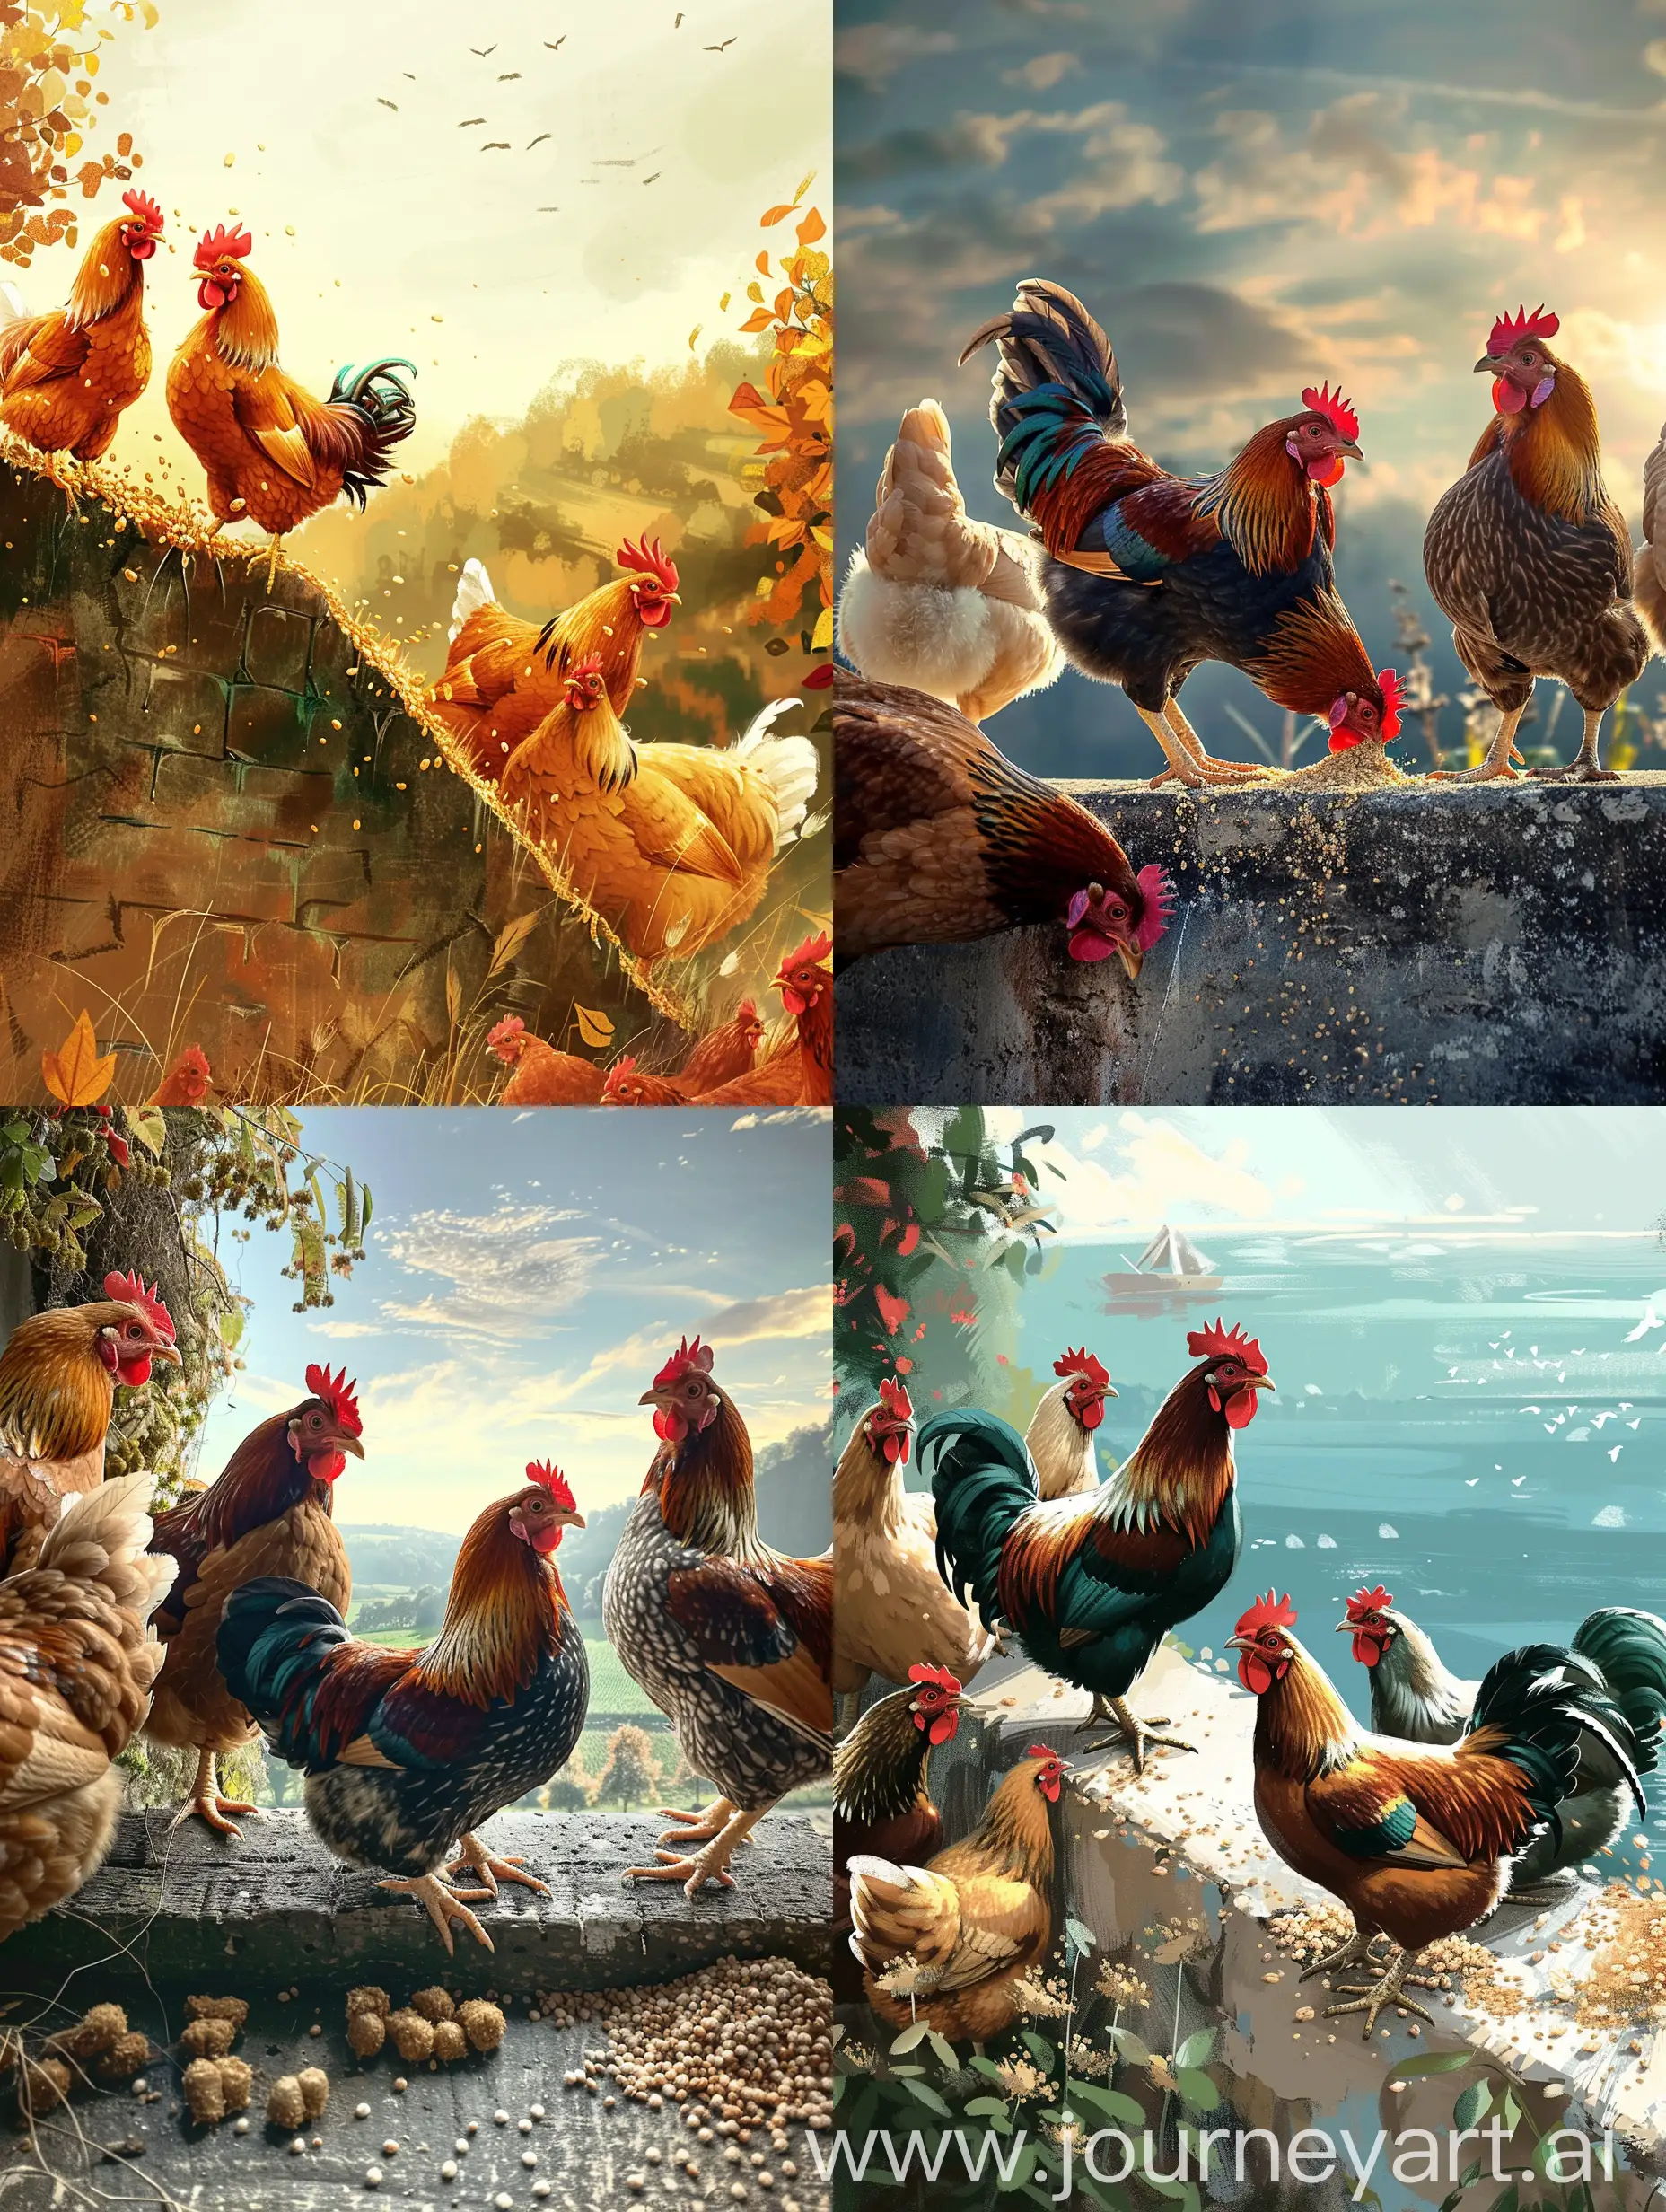 There is a chicken on the wall eating grain, the weather is sunny and beautiful. Next to the chicken are some other chickens. Next to these chickens, there is also a hen and a rooster.